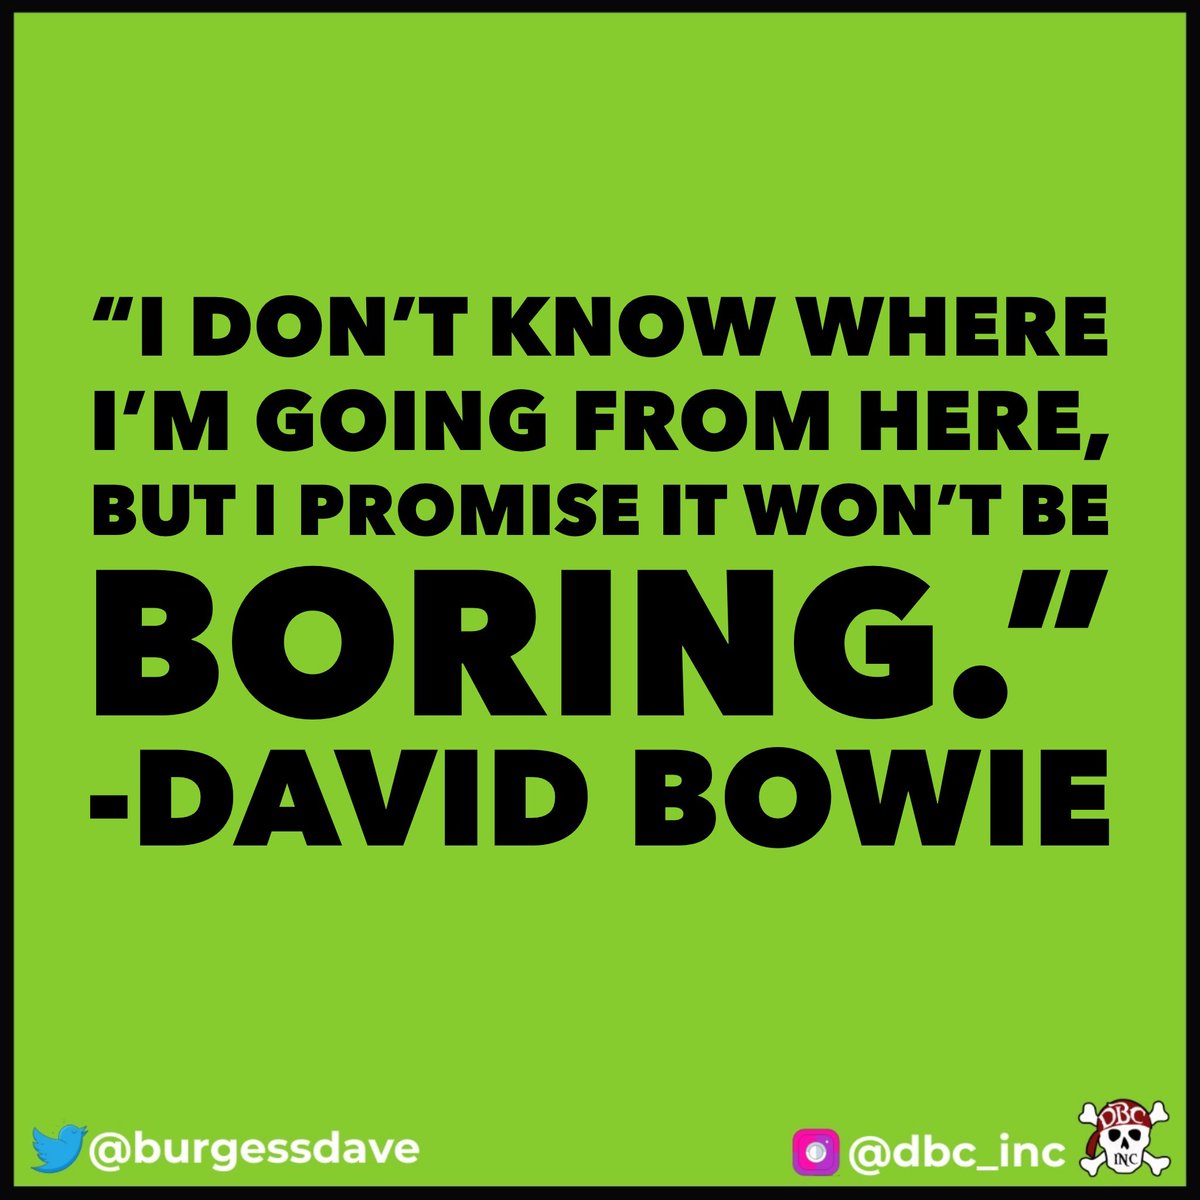 “I don’t know where I am going from here, but I promise it won’t be boring.”
- David Bowie 
#tlap